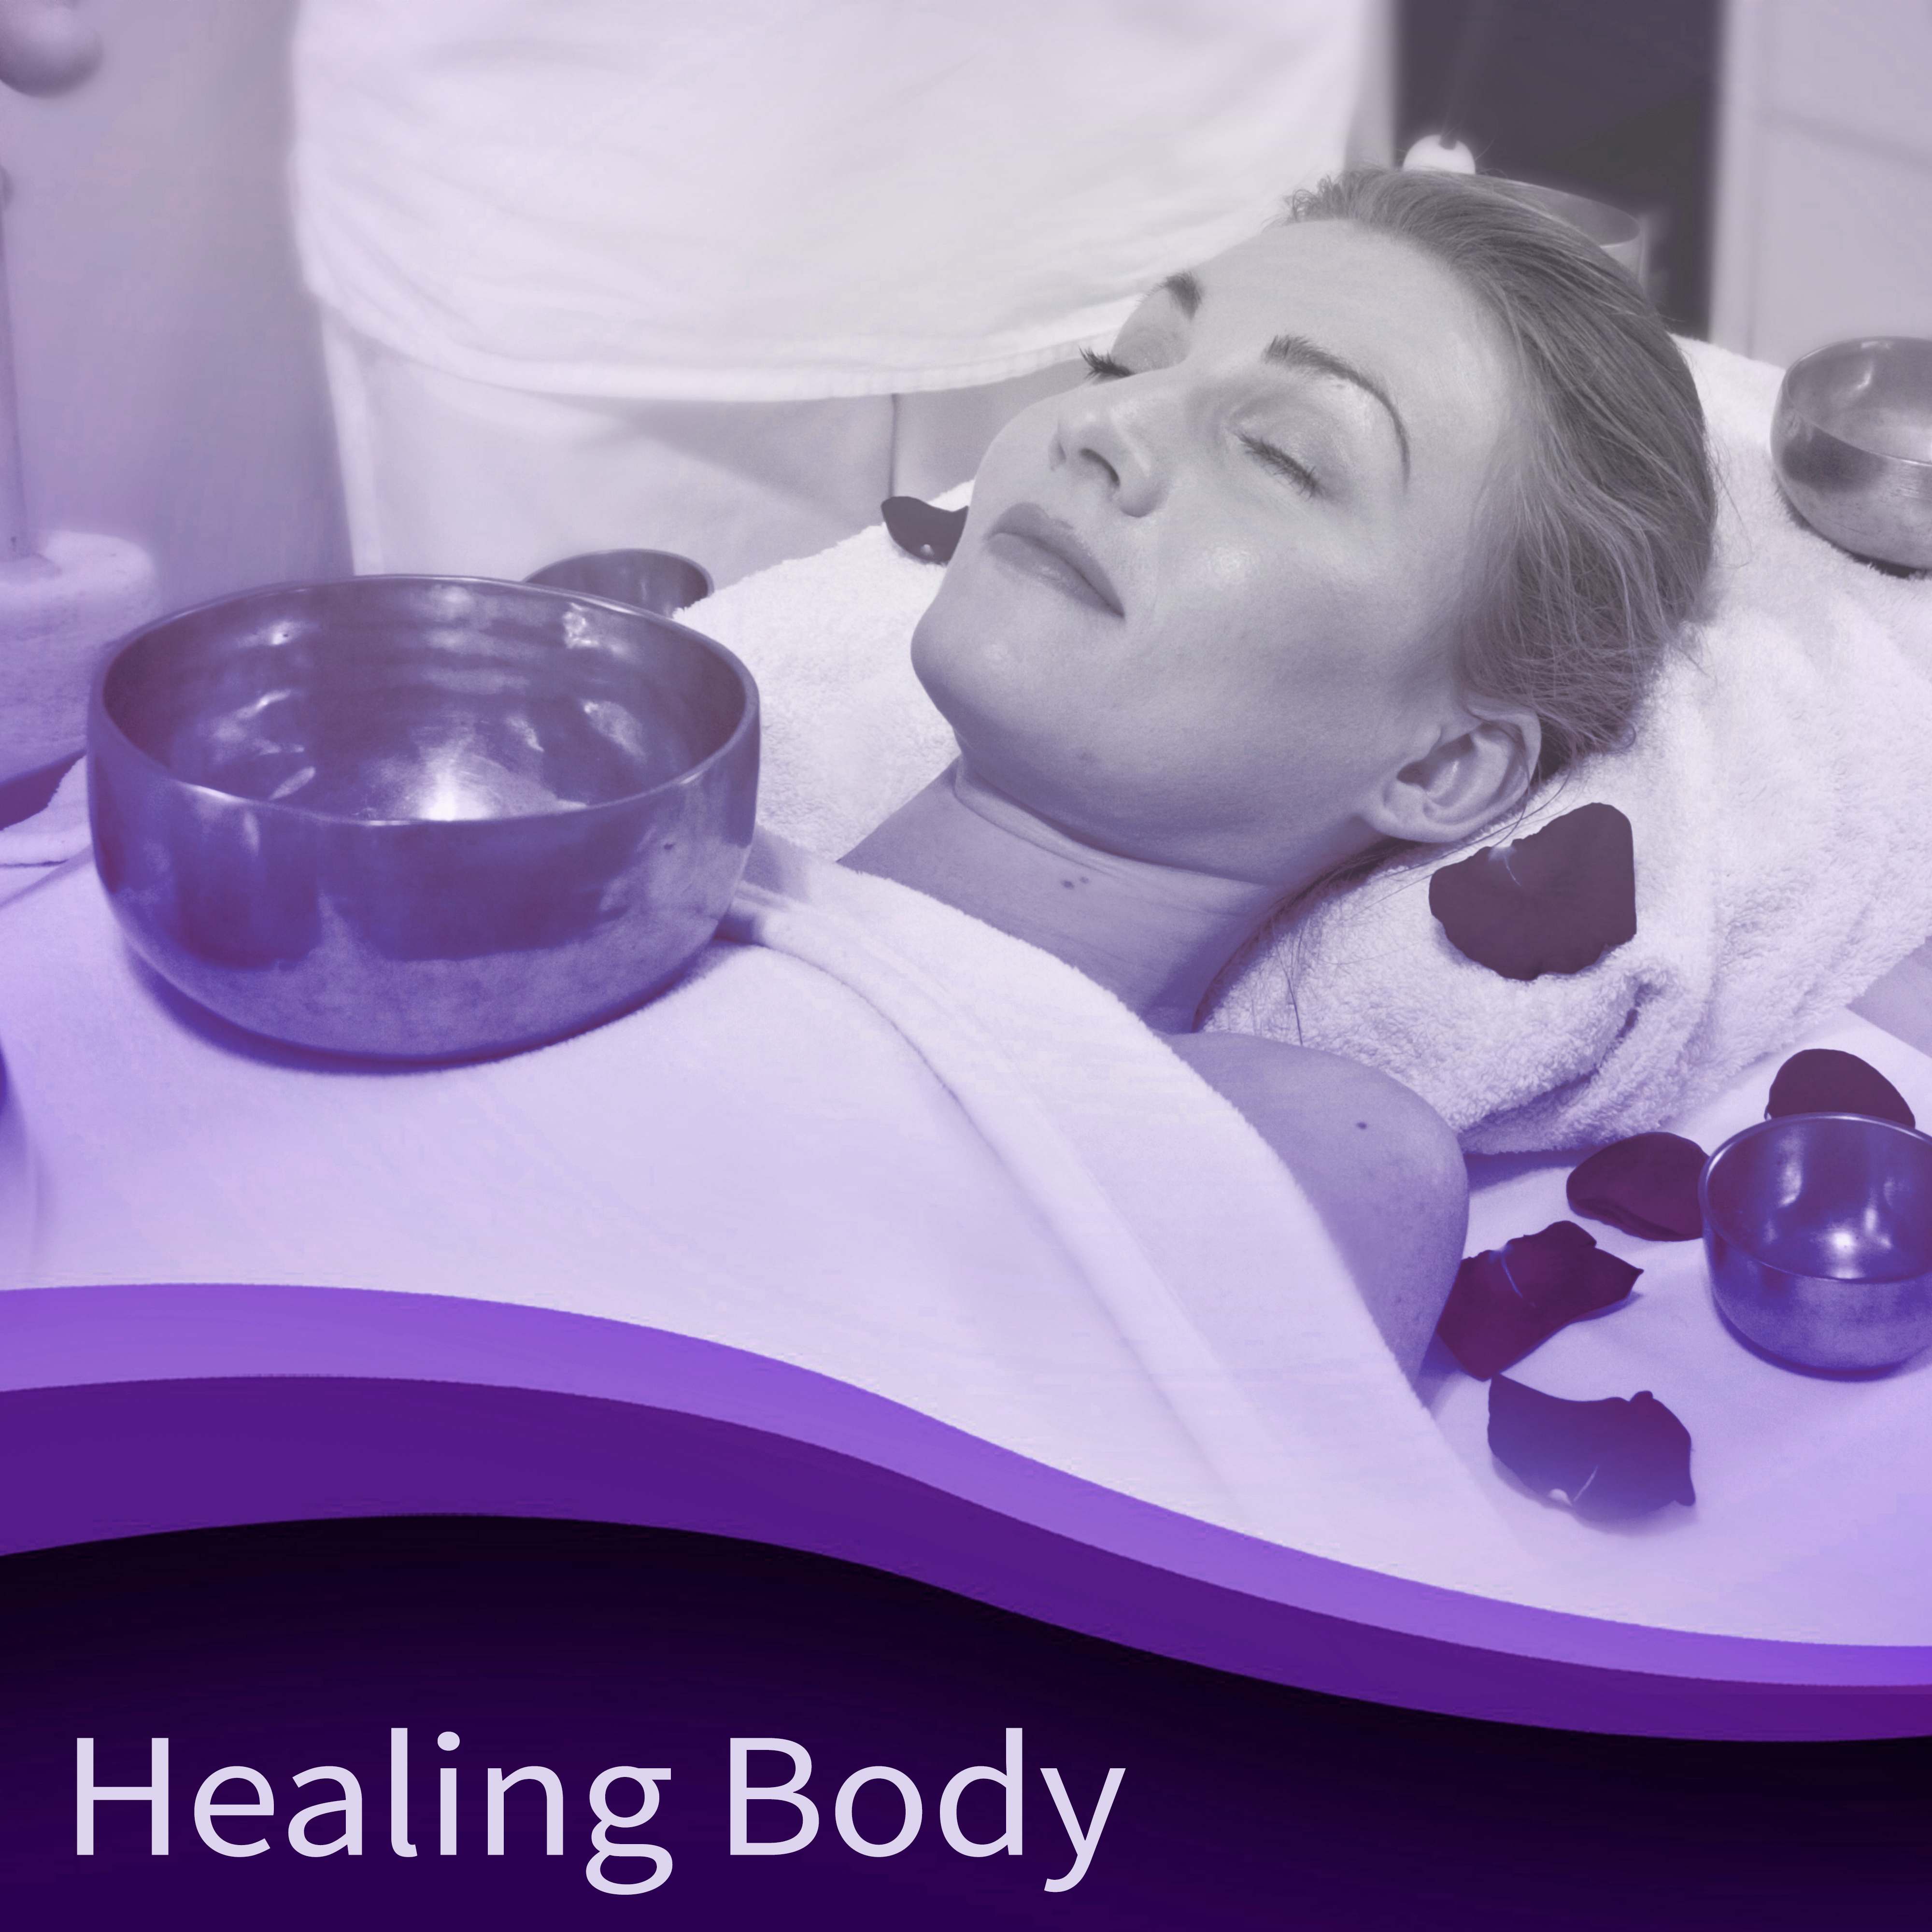 Healing Body – Relaxing Therapy for Spa, Wellness, Deep Massage, Pure Mind, Inner Harmony, Anti Stress Songs, Contemplation of Nature, Reiki, Spa Dreams